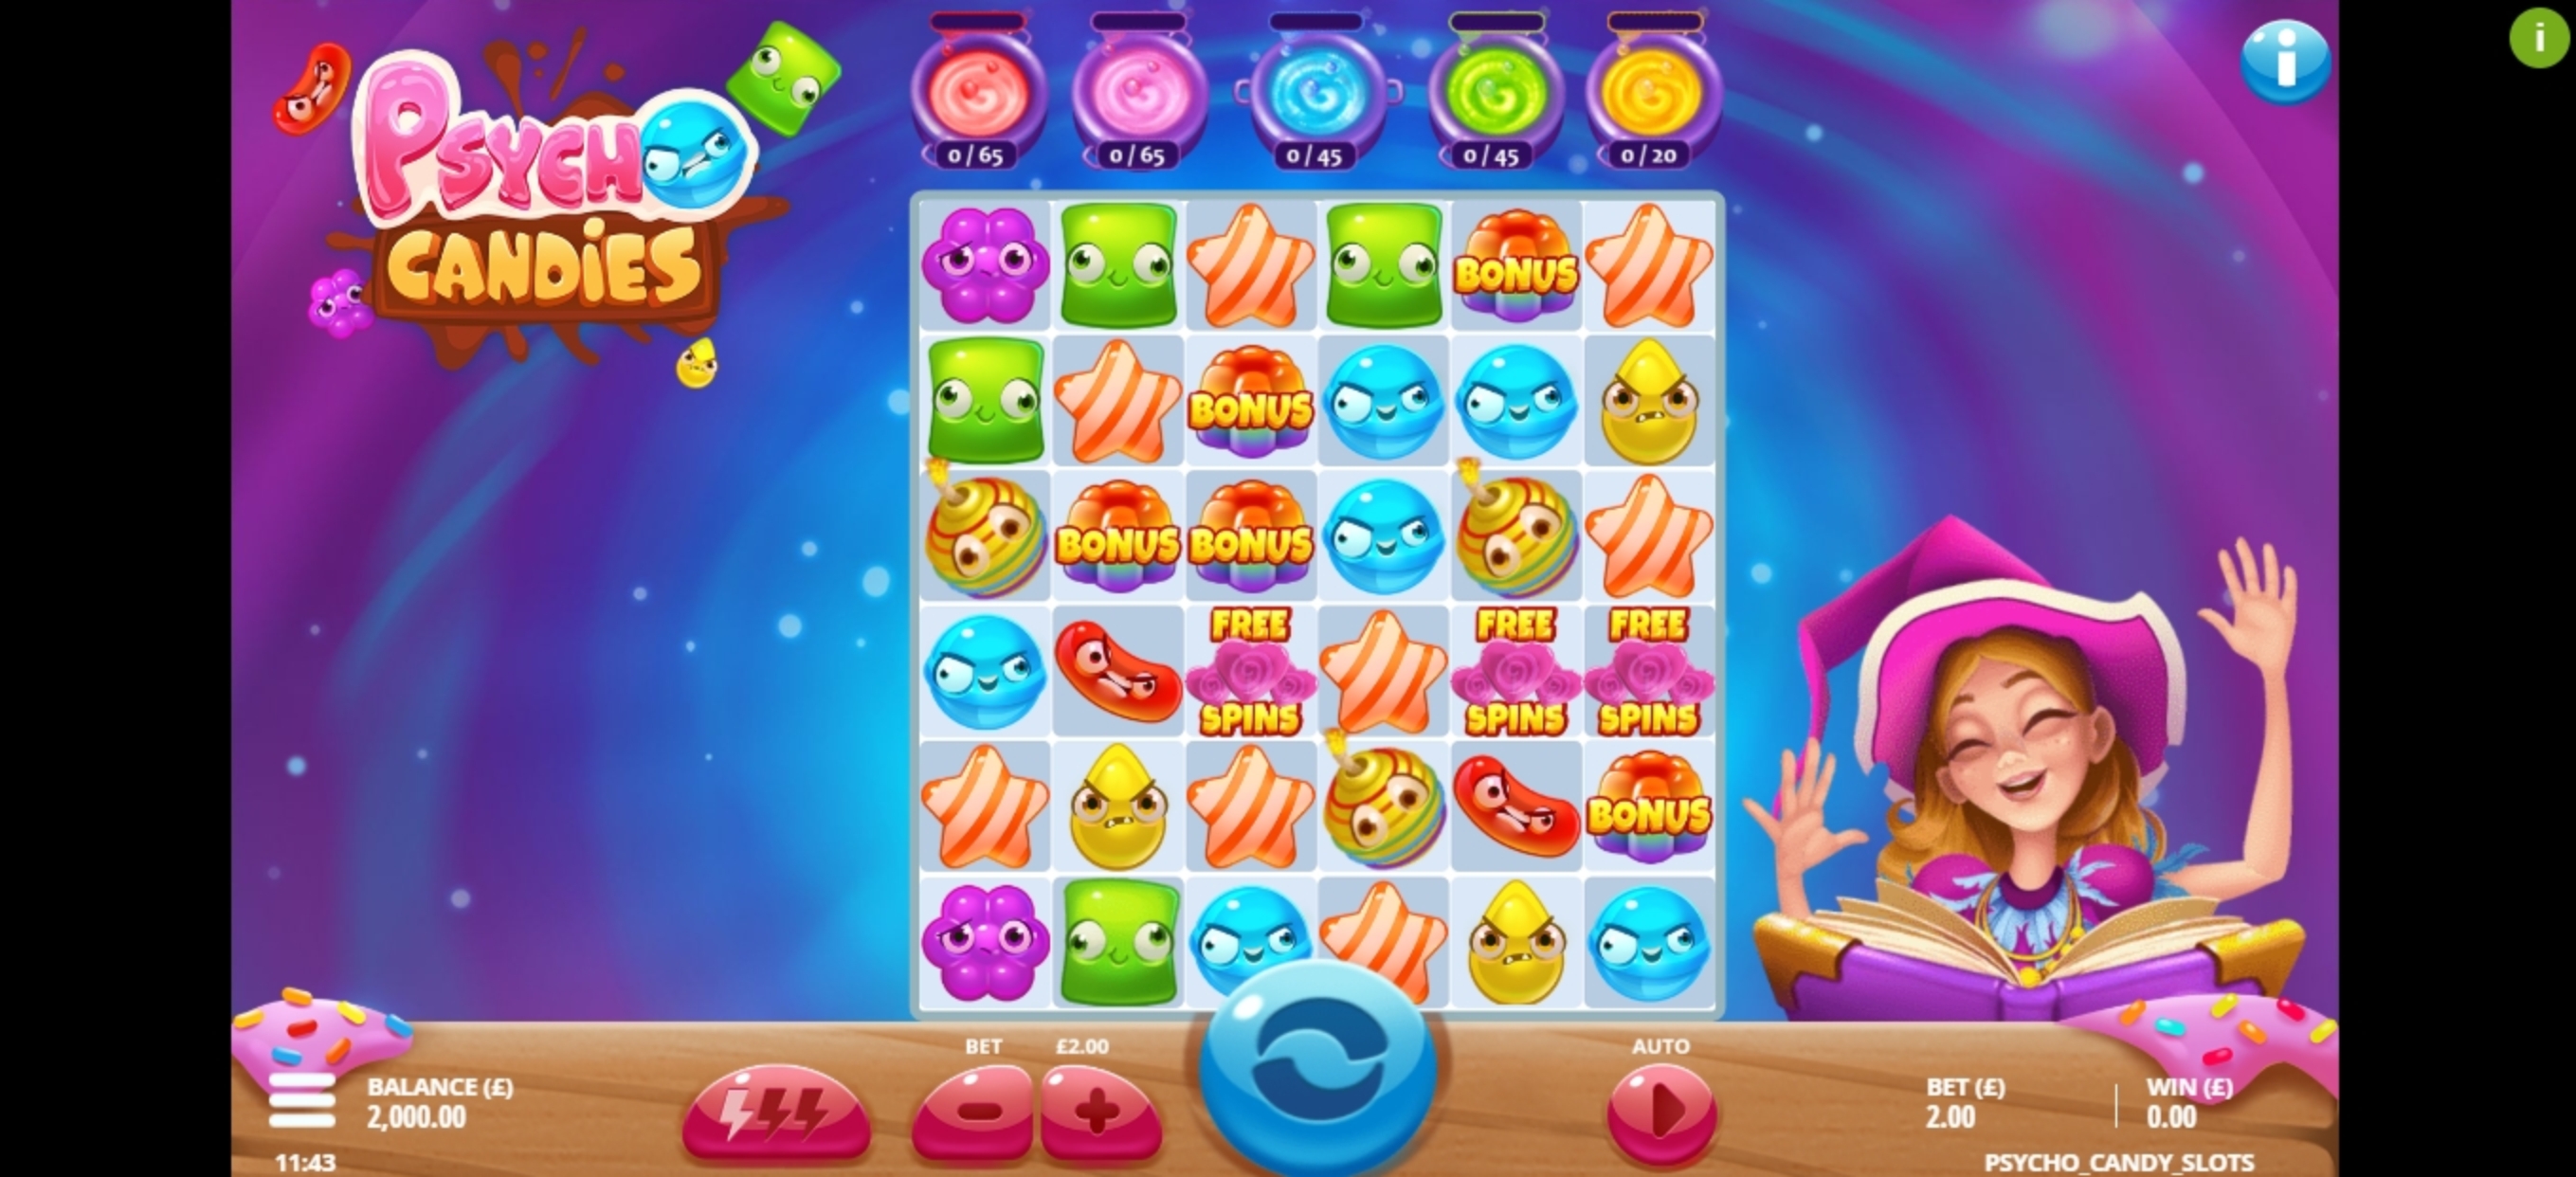 Reels in Psycho Candies Slot Game by Gluck Games